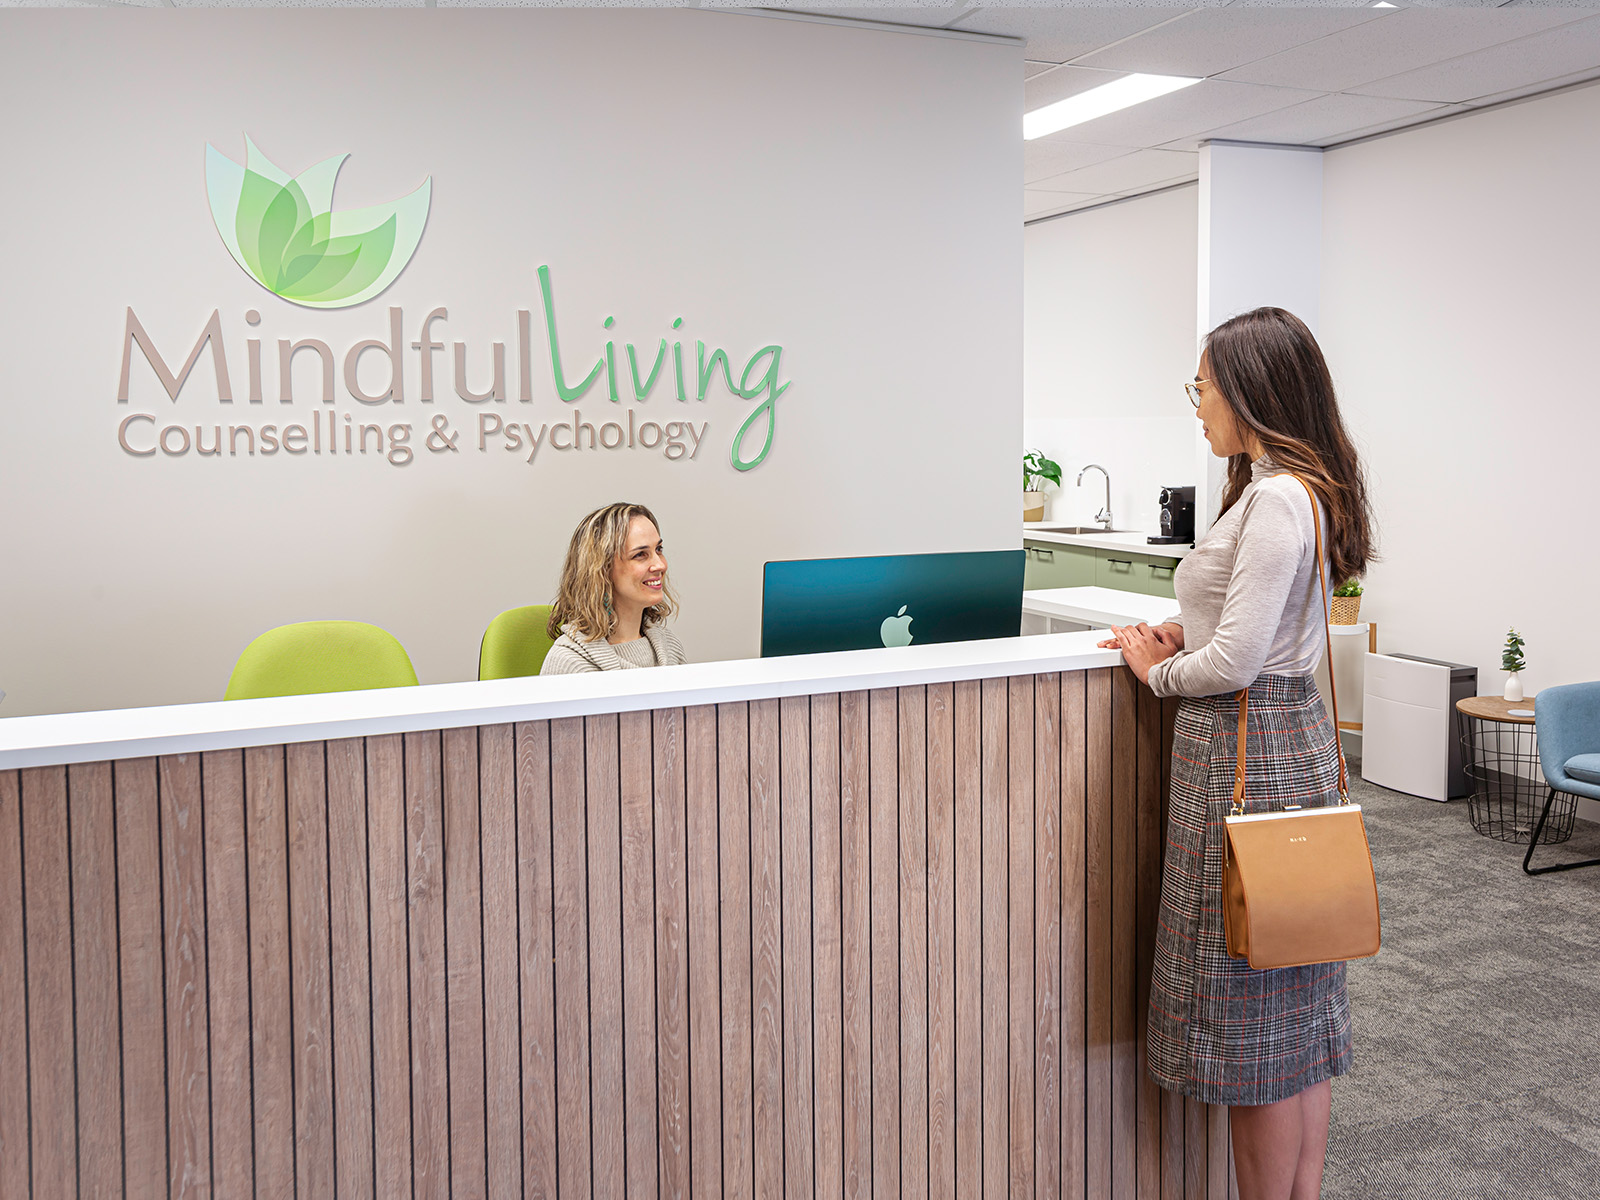 Mindful Living reception fitout